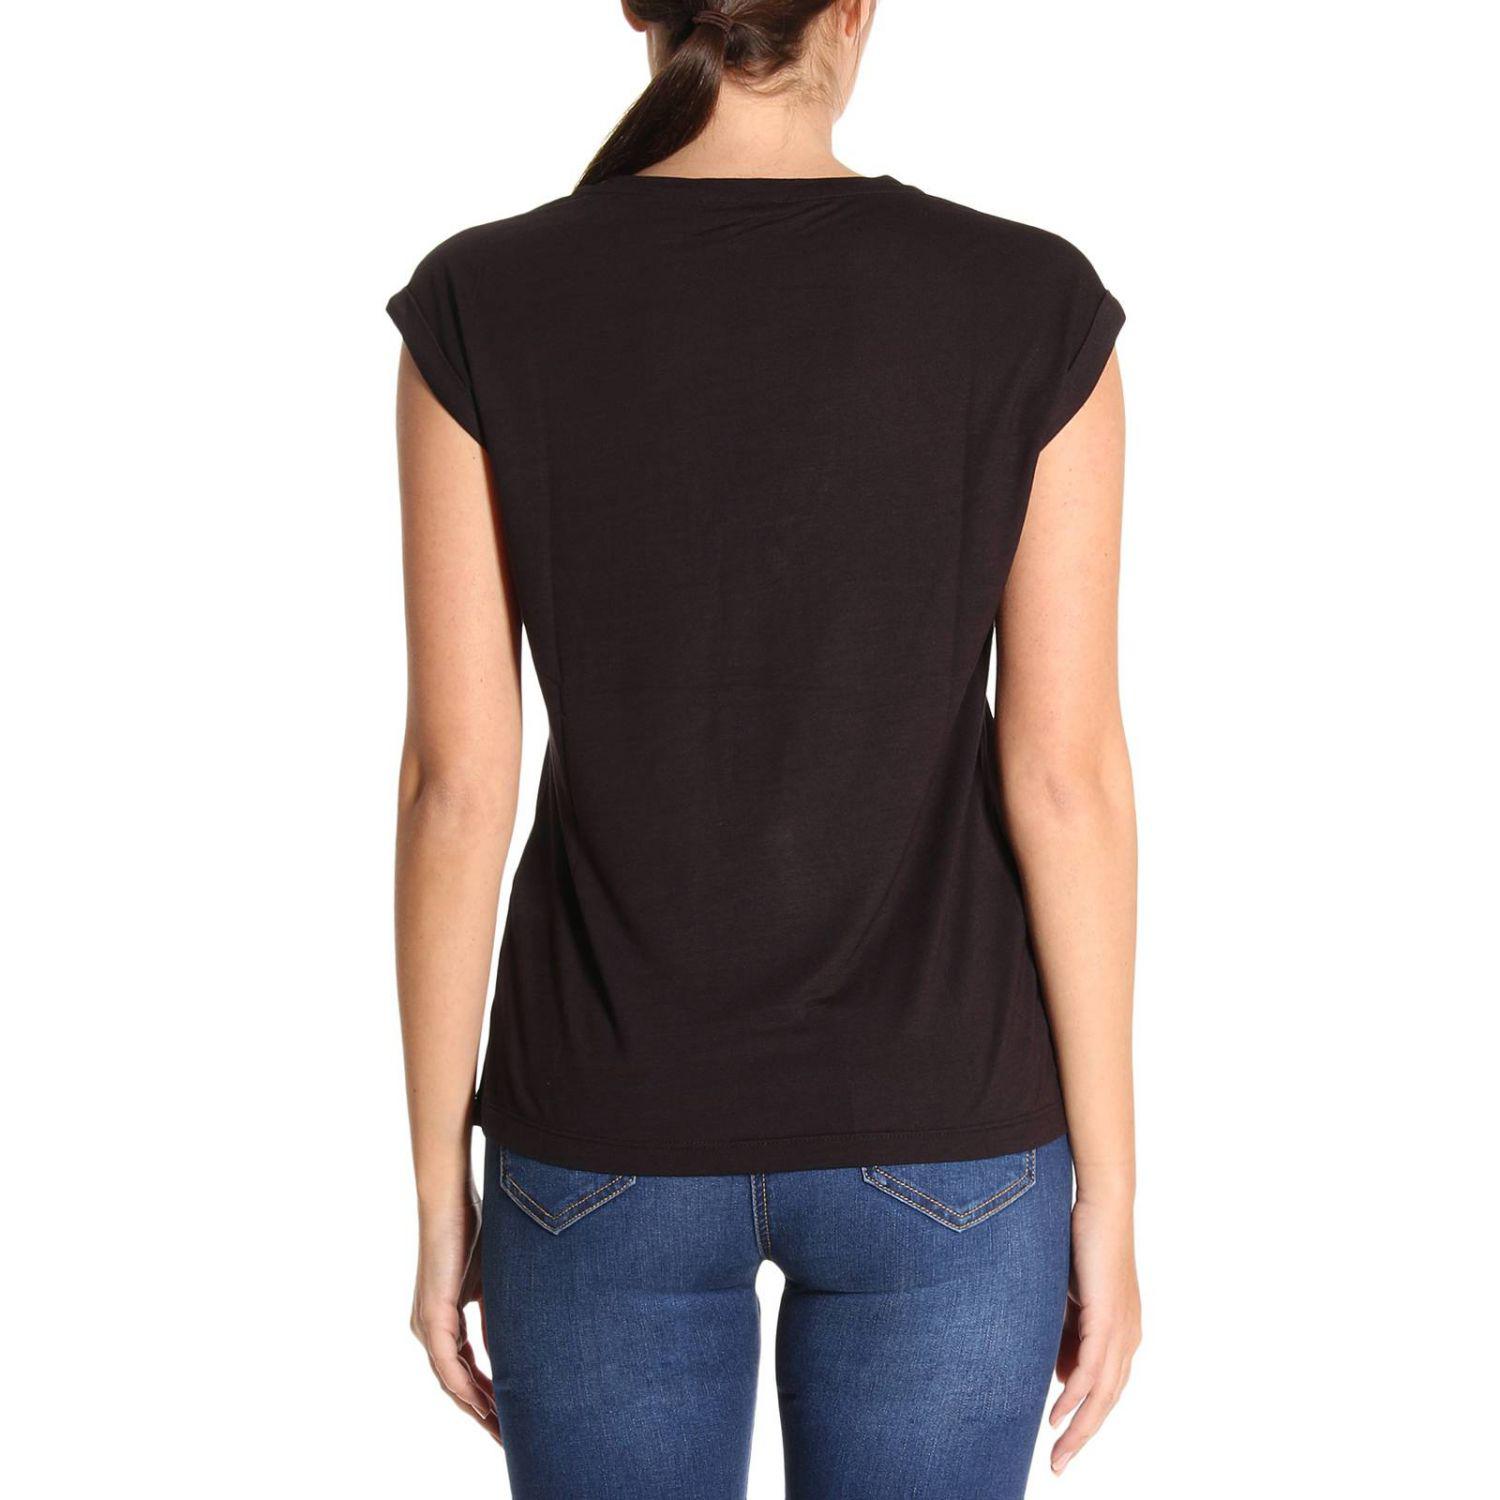 Emporio Armani Synthetic T-shirt Women in Black - Lyst